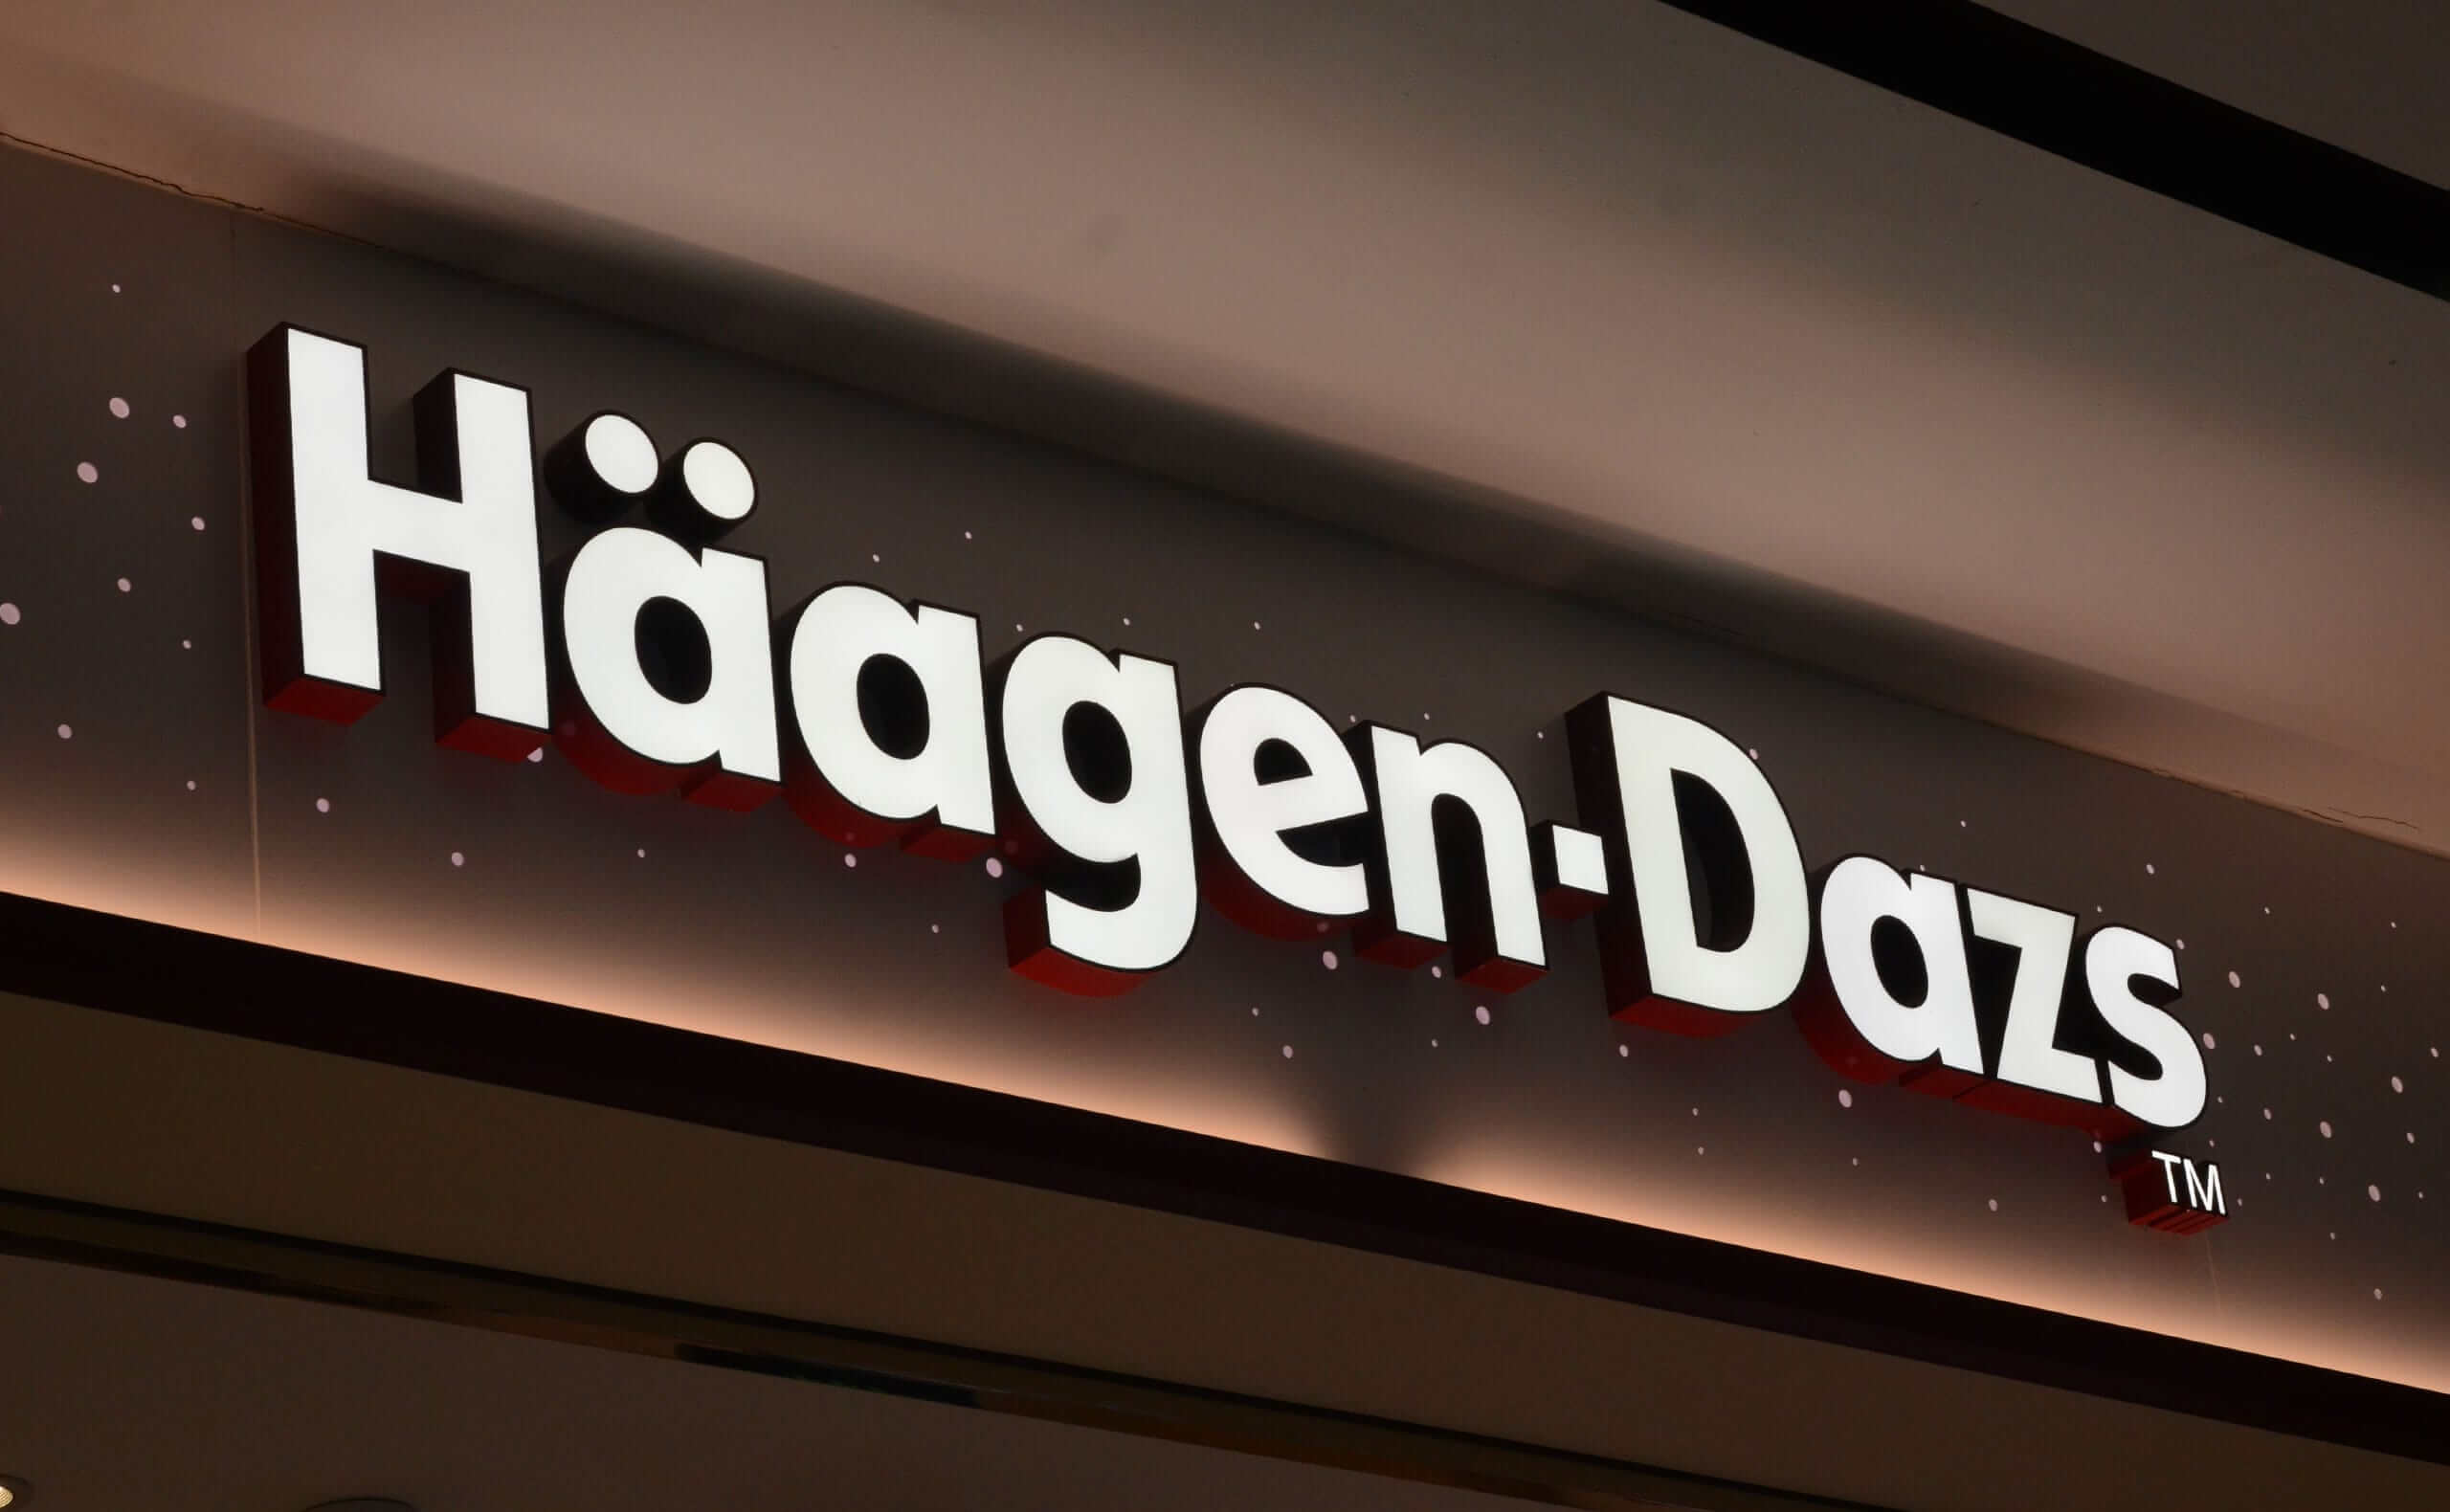 Metal Front Lit Channel Letters With Face Return For Häagen-Dazs